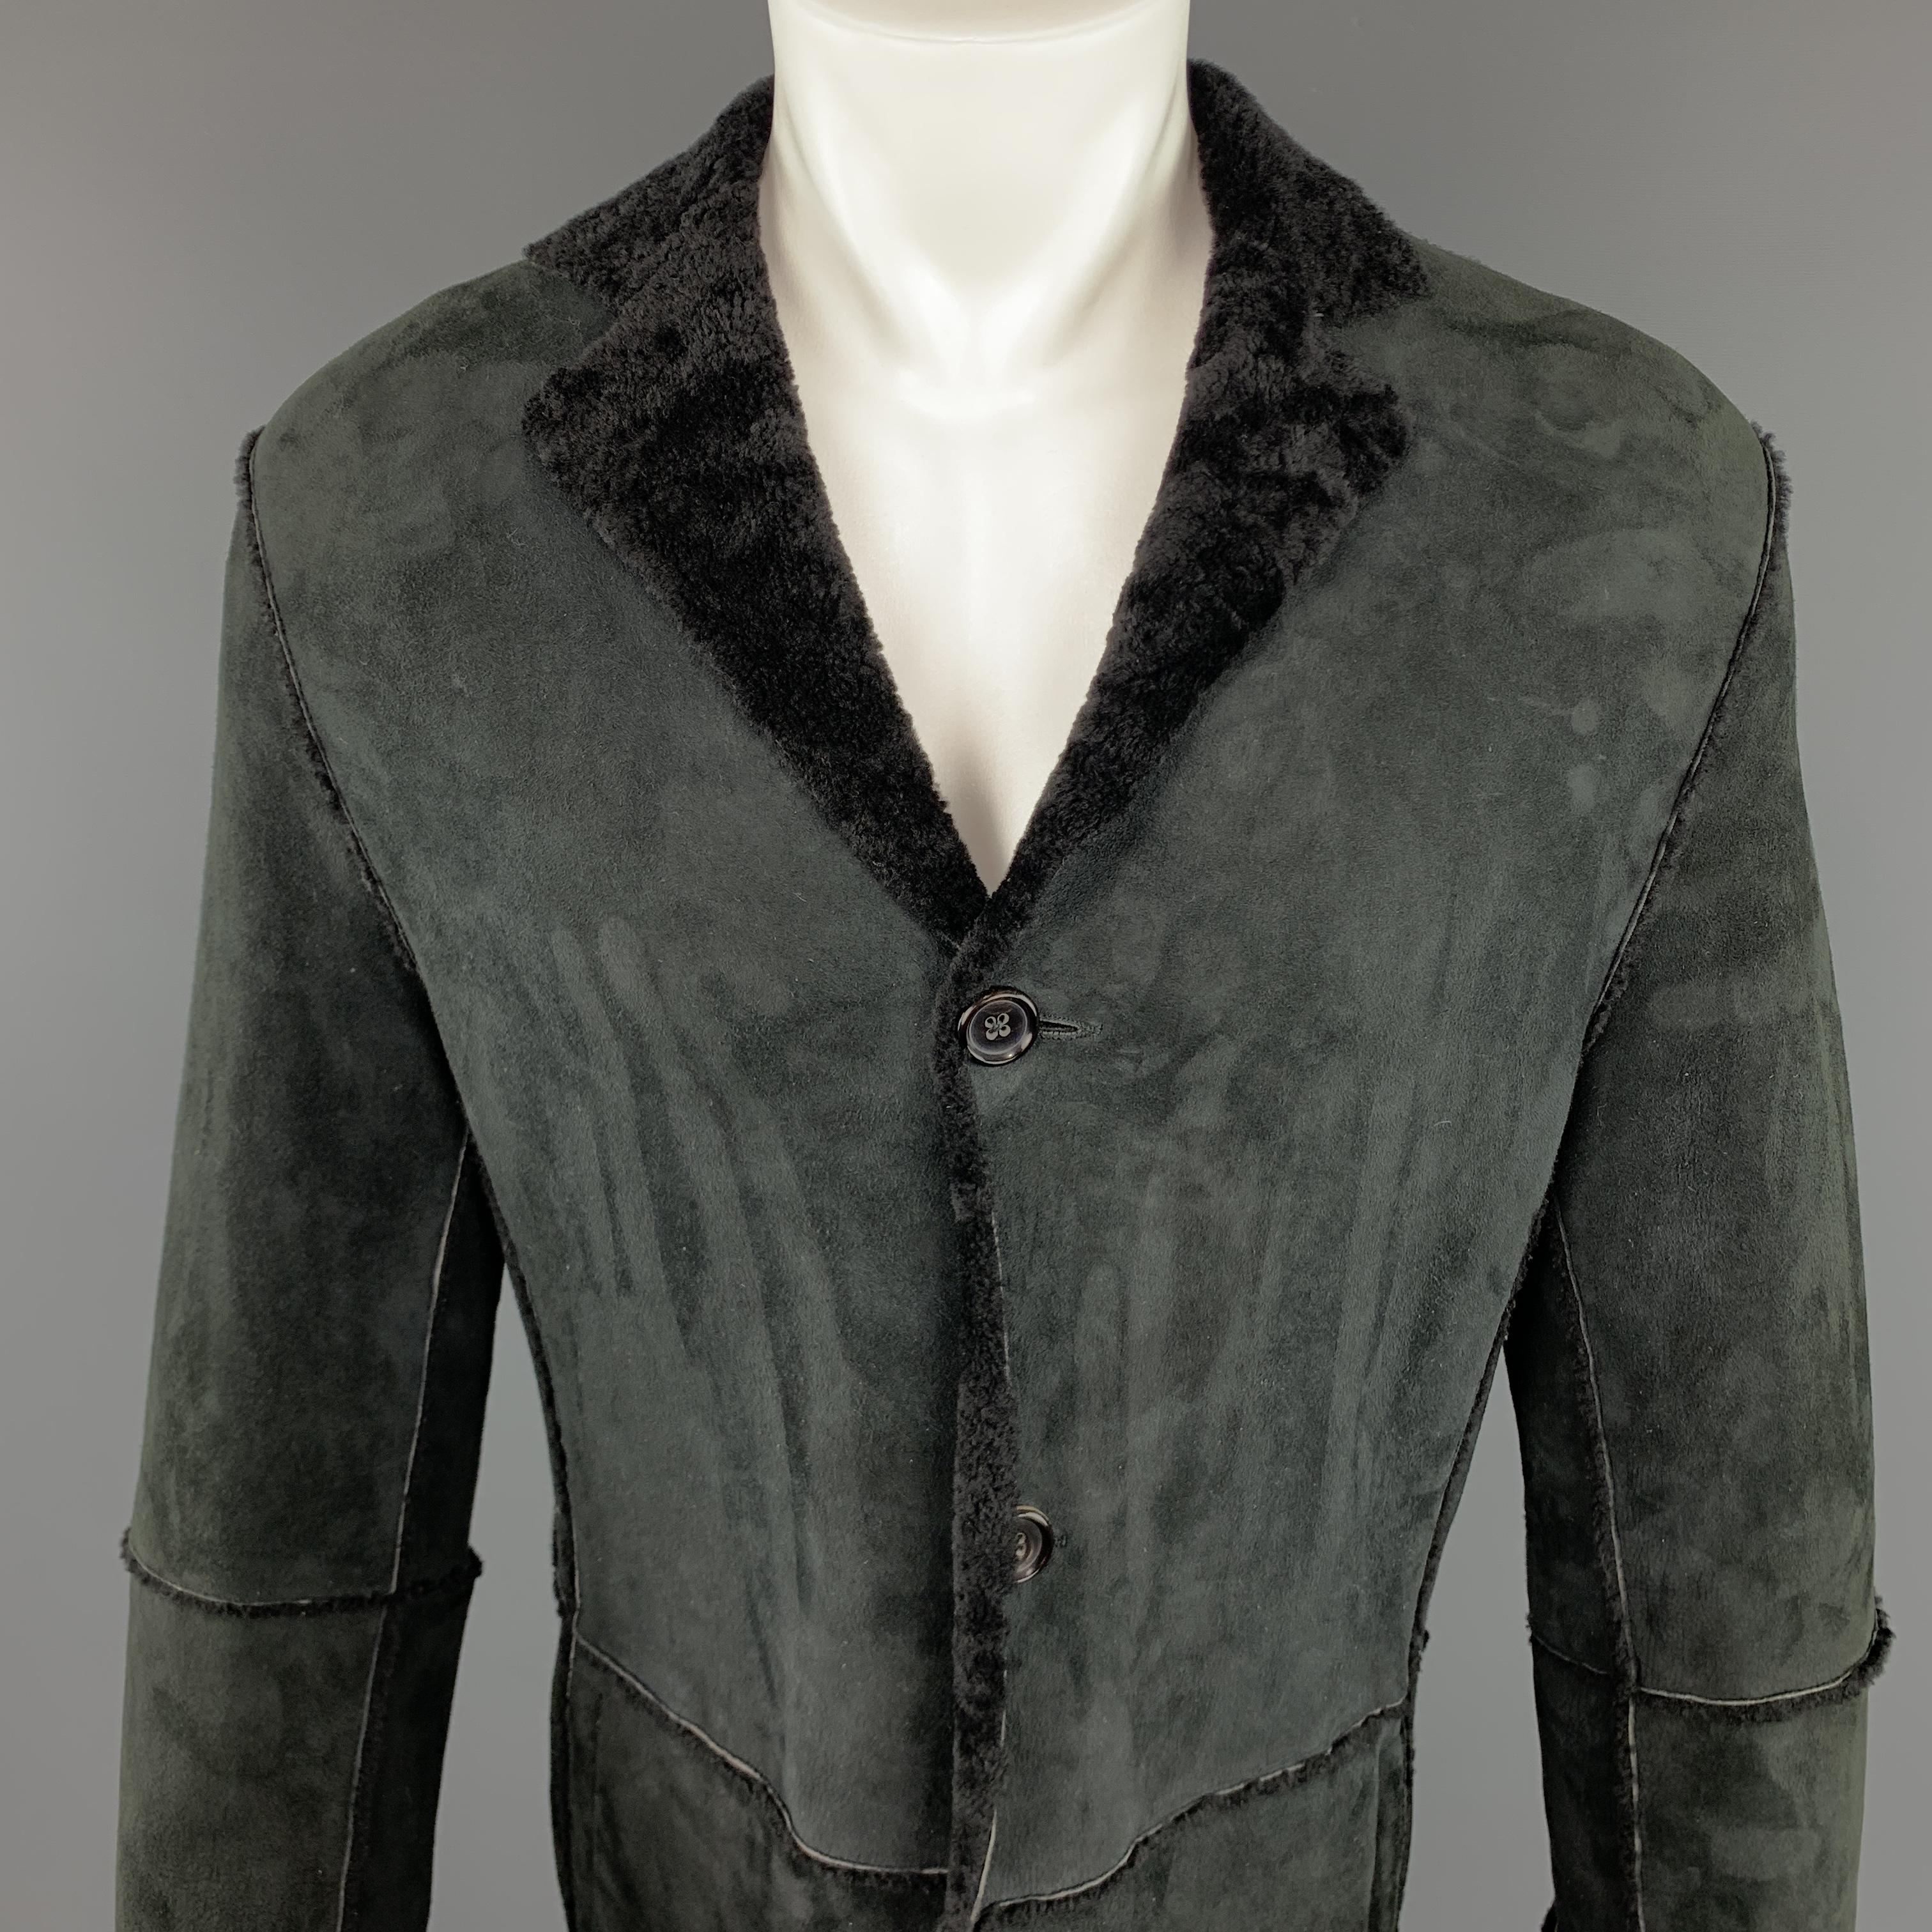 JIL SANDER Long Coat comes in a black tone in a lamb shearling material, with a notch lapel, four buttons at closure, single breasted, slit pockets, and a single vent at back. Made in Italy.

Excellent Pre-Owned Condition.
Marked: IT